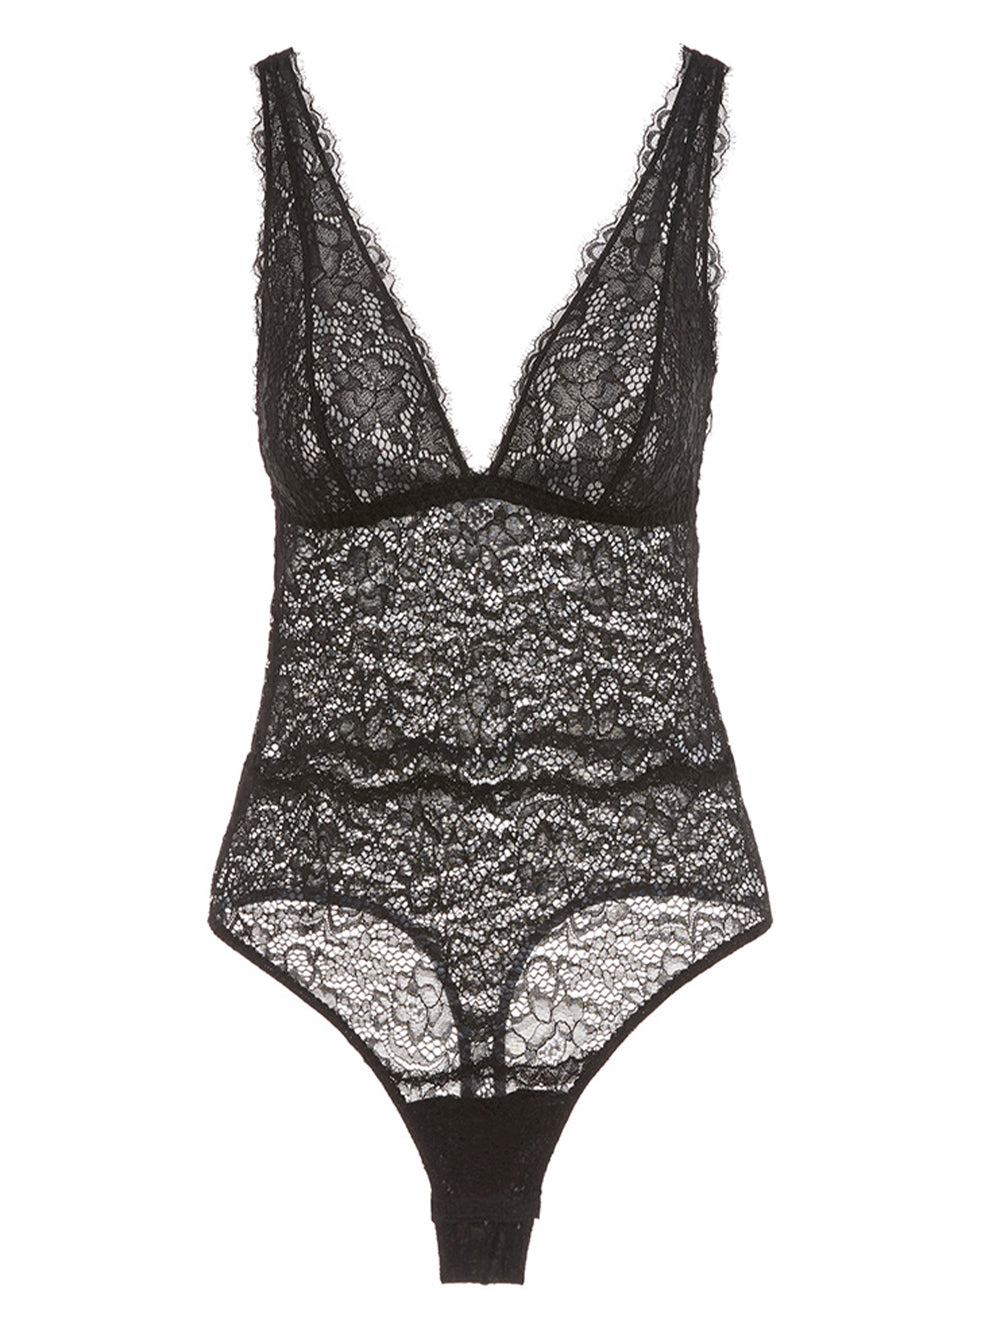 The lingerie on display trend: Cosabella lace bodysuit